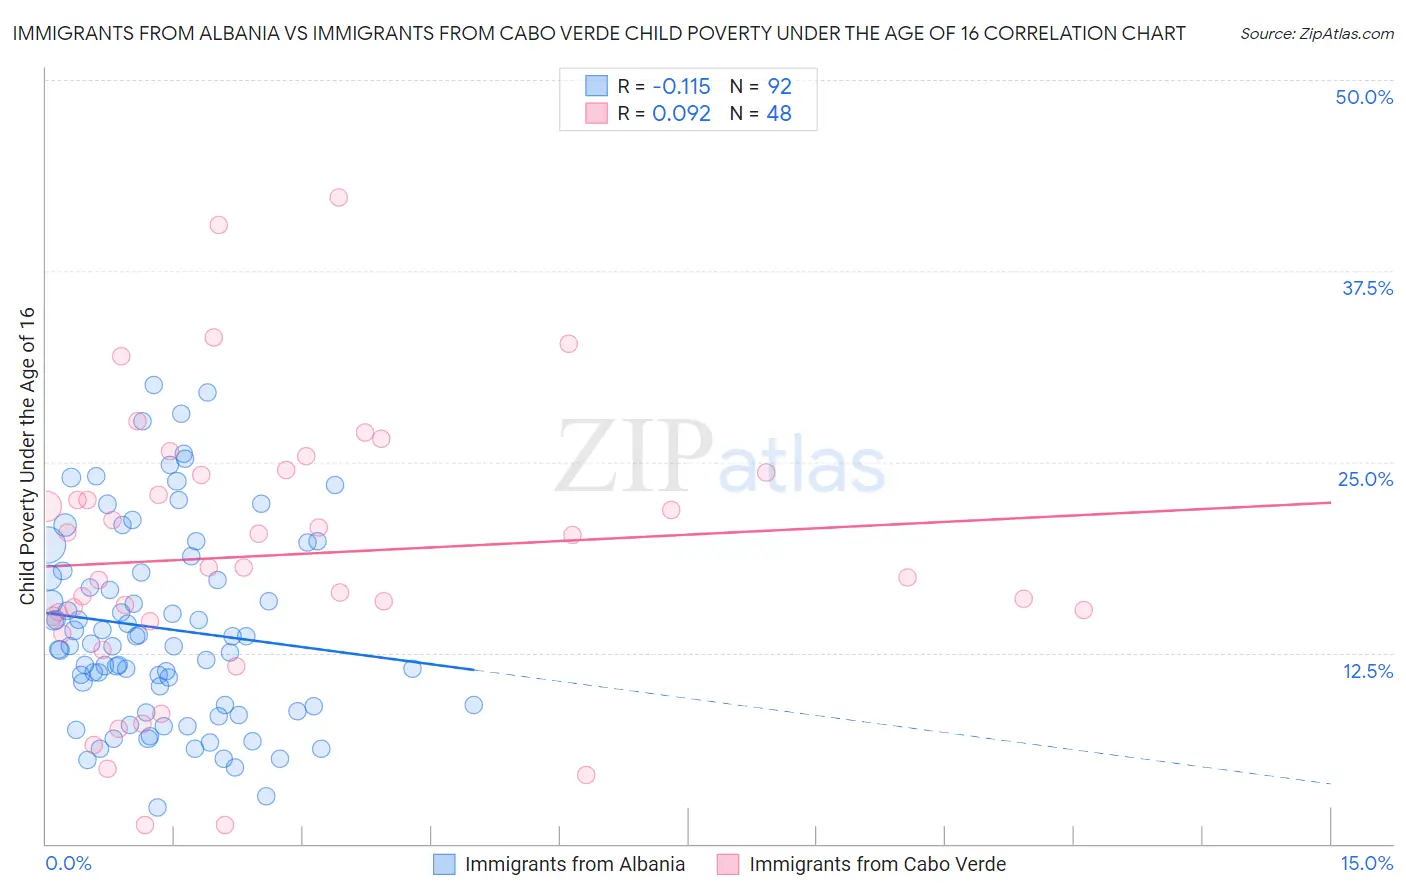 Immigrants from Albania vs Immigrants from Cabo Verde Child Poverty Under the Age of 16